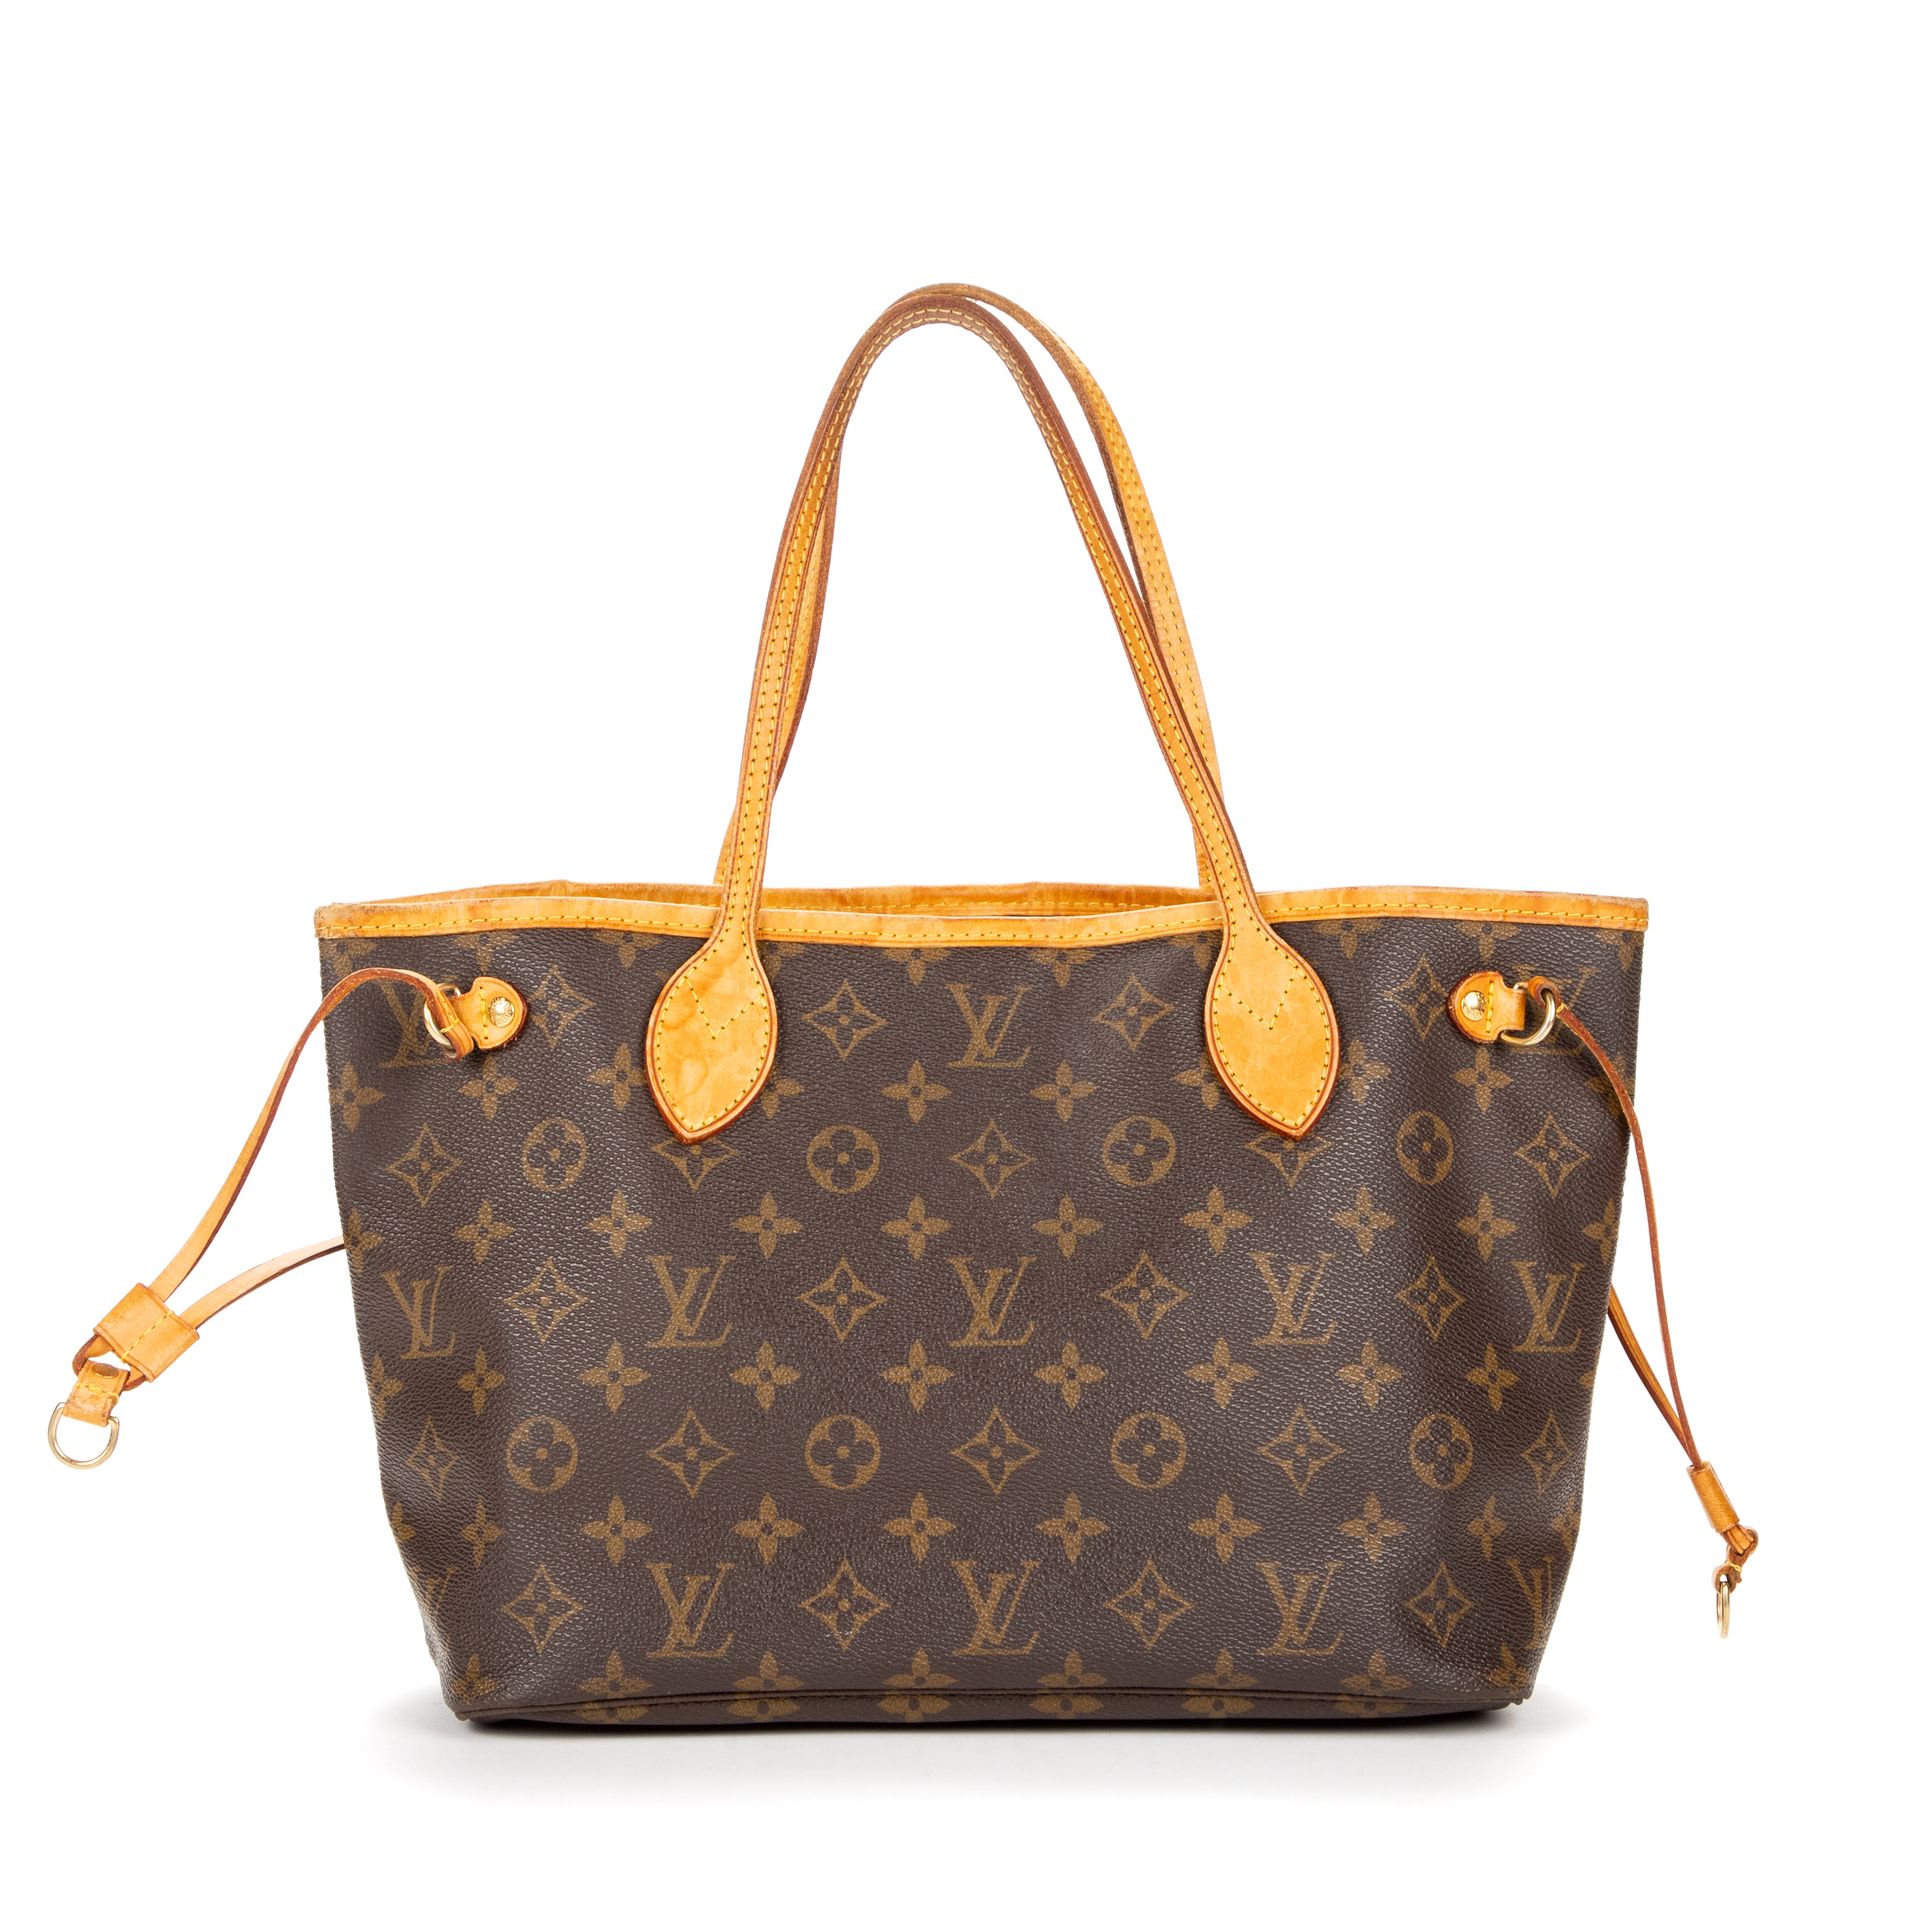 LOUIS VUITTON - Shoulder bag Neverfull small model in mo…